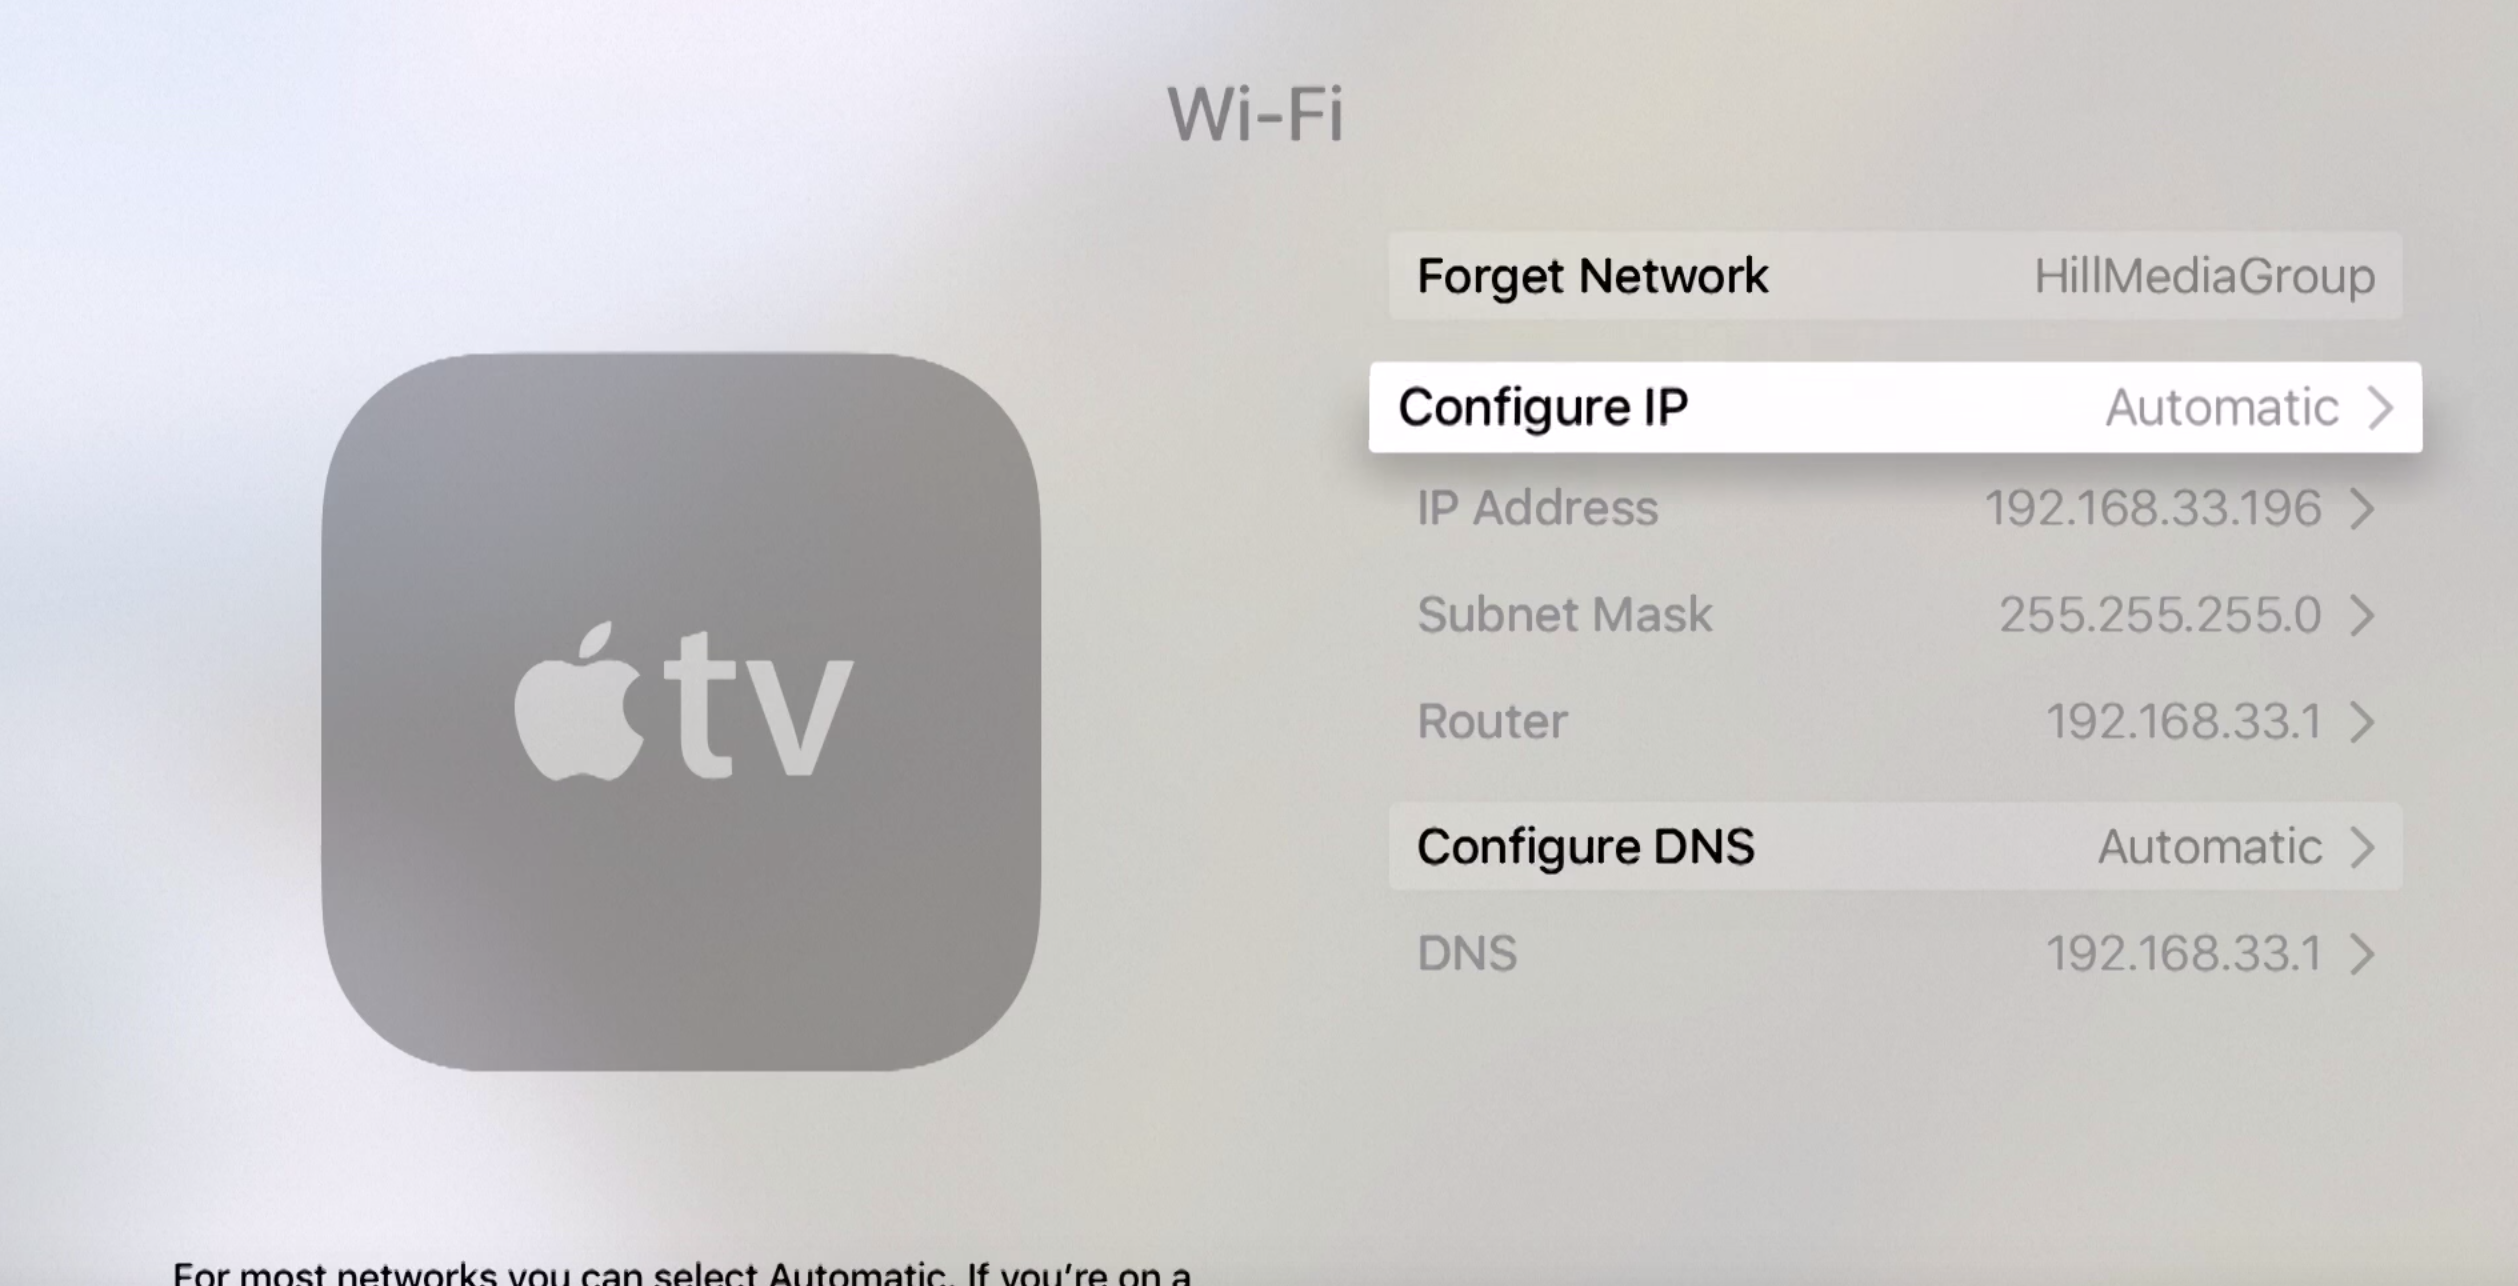 Configure connected WiFi IP address from automatic to manual